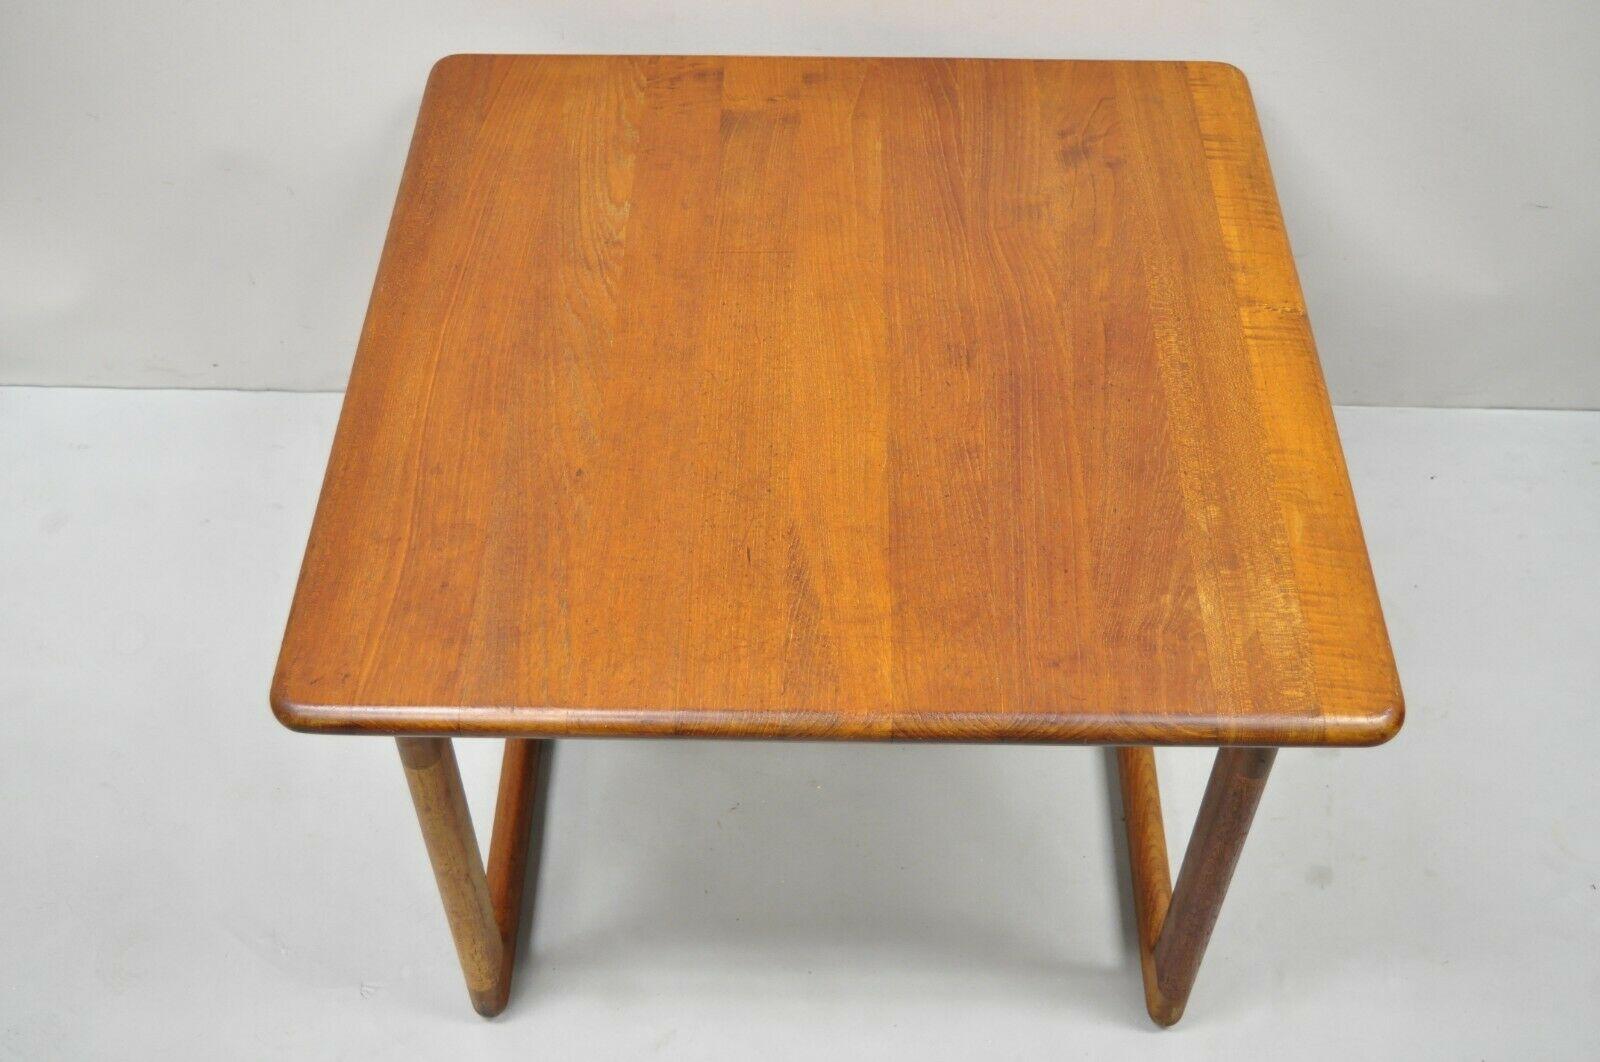 Vintage Mid Century Danish Modern Teak Wood Square Side End Table. Item features a stretcher base, solid wood construction, beautiful wood grain, original Denmark stamp, clean Modernist lines, great style and form. Circa Mid 20th Century.